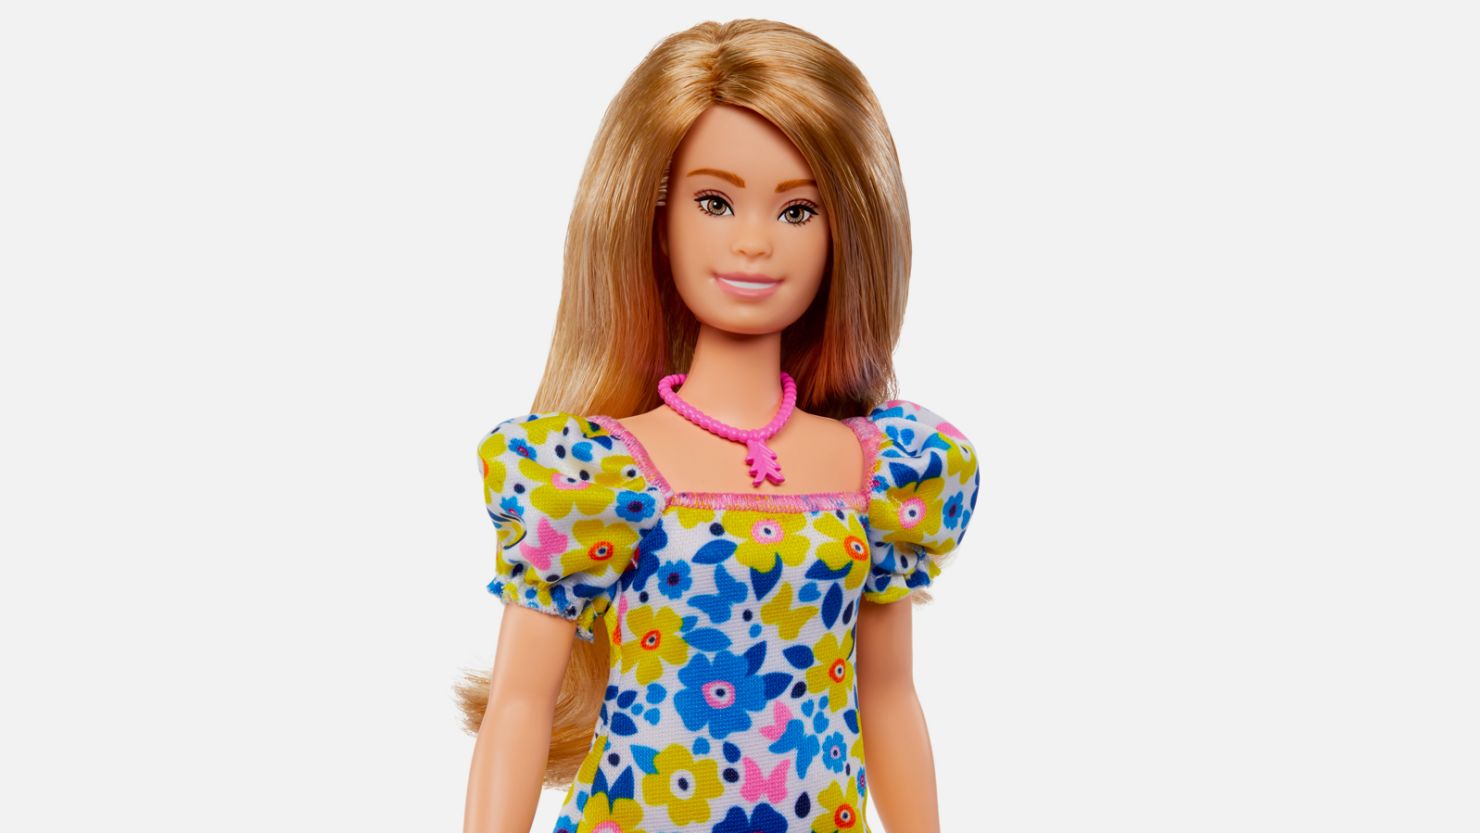 Mattel's new Fashionistas Barbie represents a person with Down syndrome.